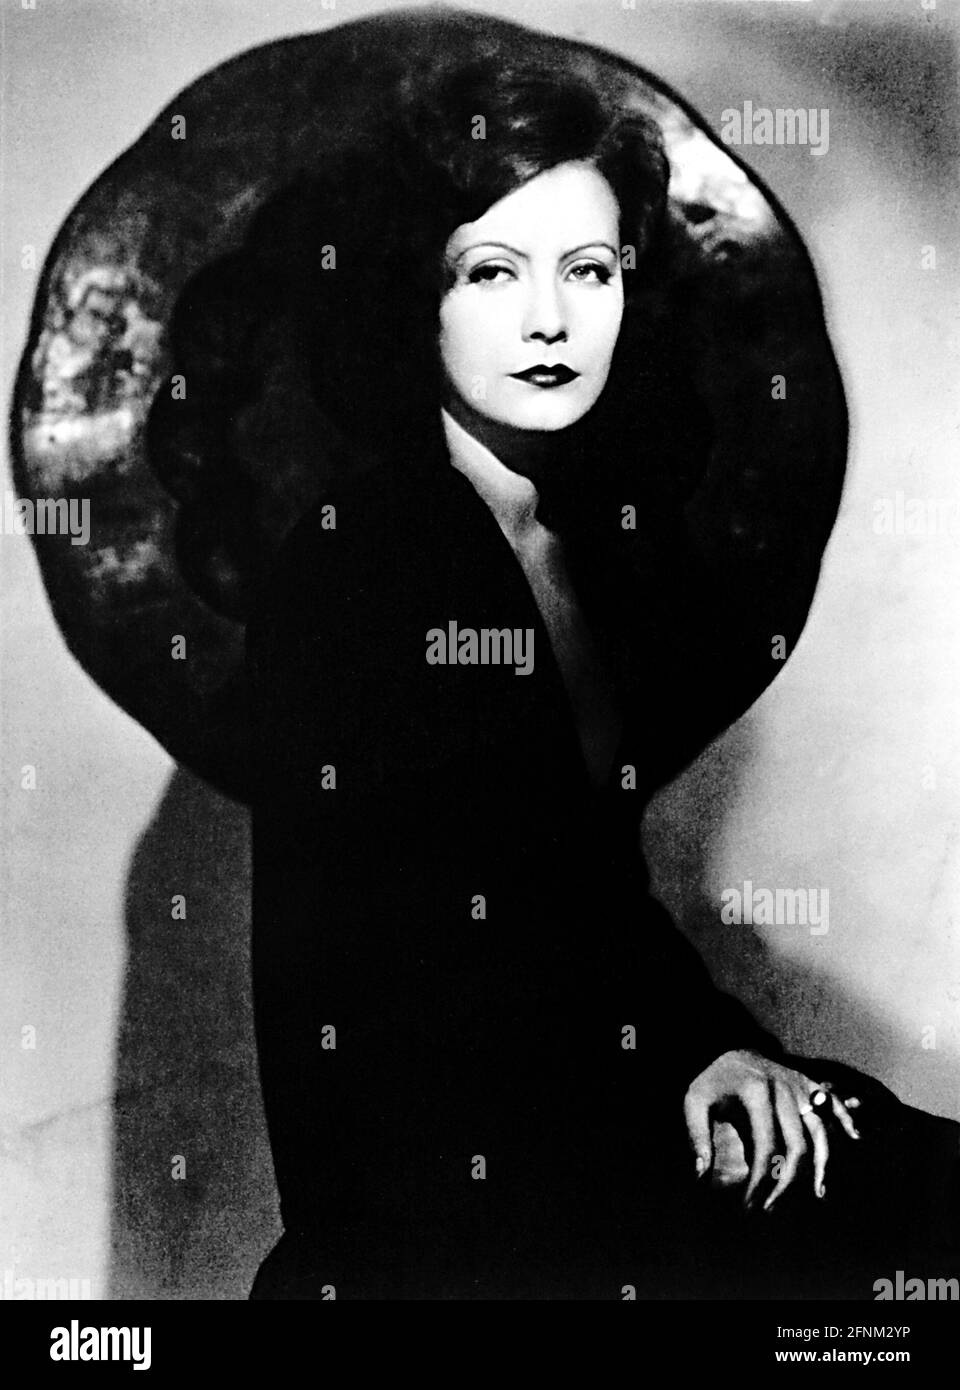 Garbo, Greta, 18.9.1905 - 15.4.1990, Swedish actress, half length, 1920s, ADDITIONAL-RIGHTS-CLEARANCE-INFO-NOT-AVAILABLE Stock Photo